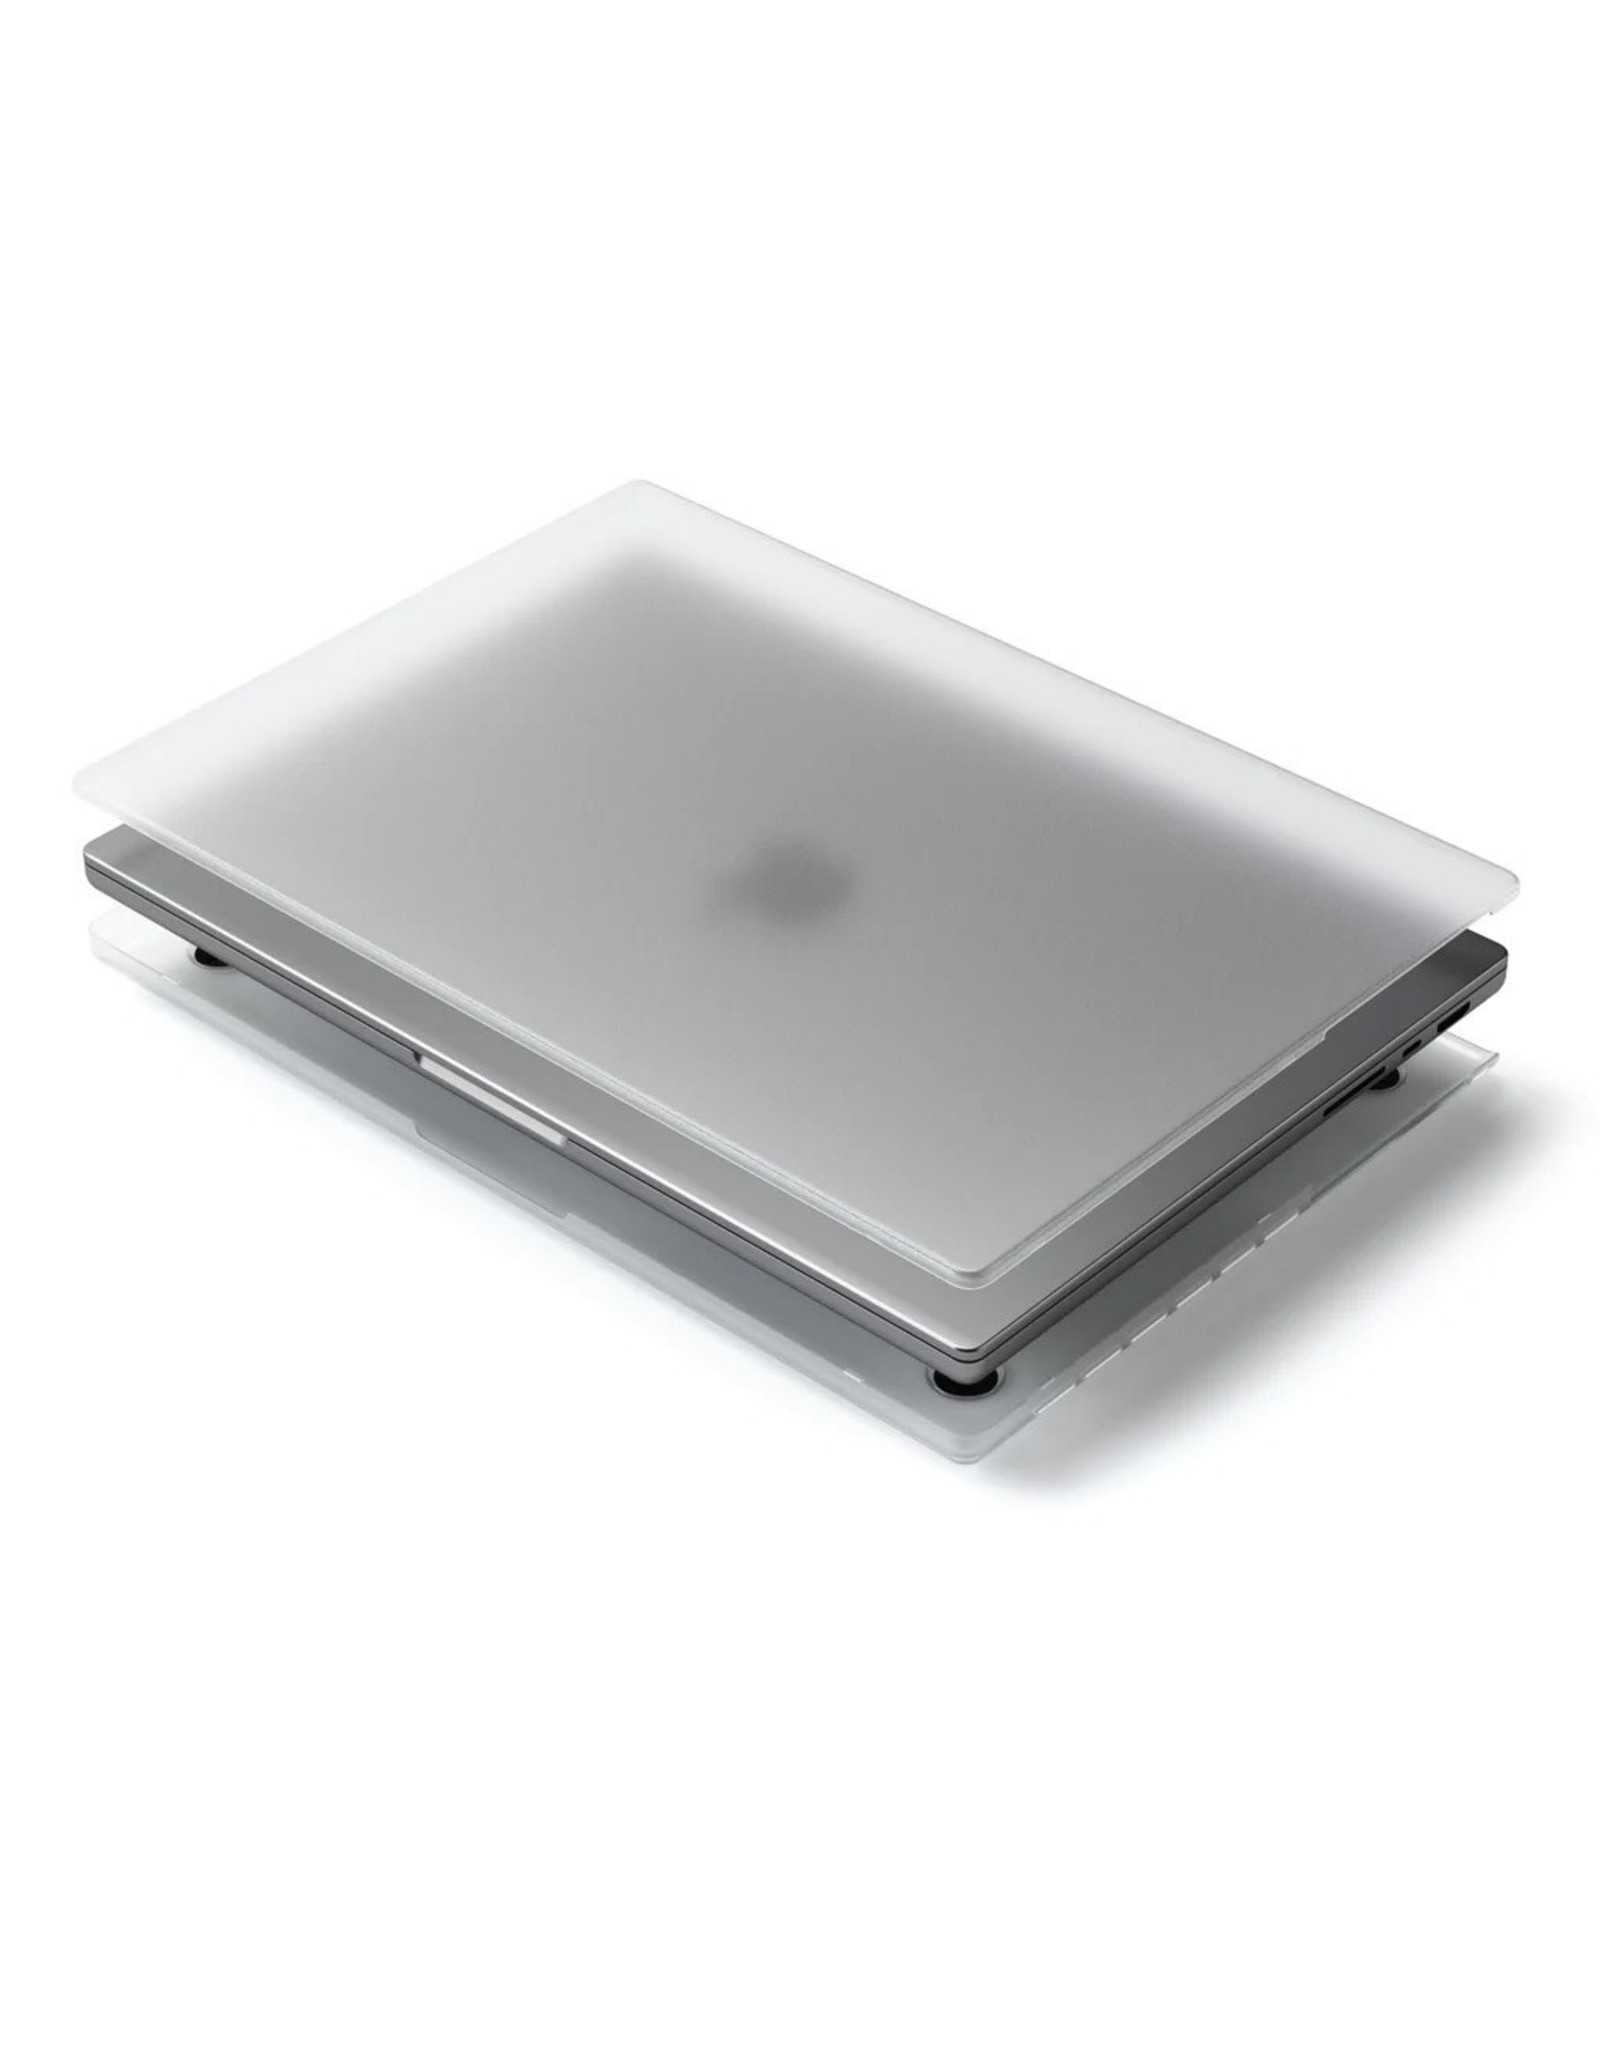 Satechi Satechi Eco-Hardshell Case for MacBook Pro 16" - Clear